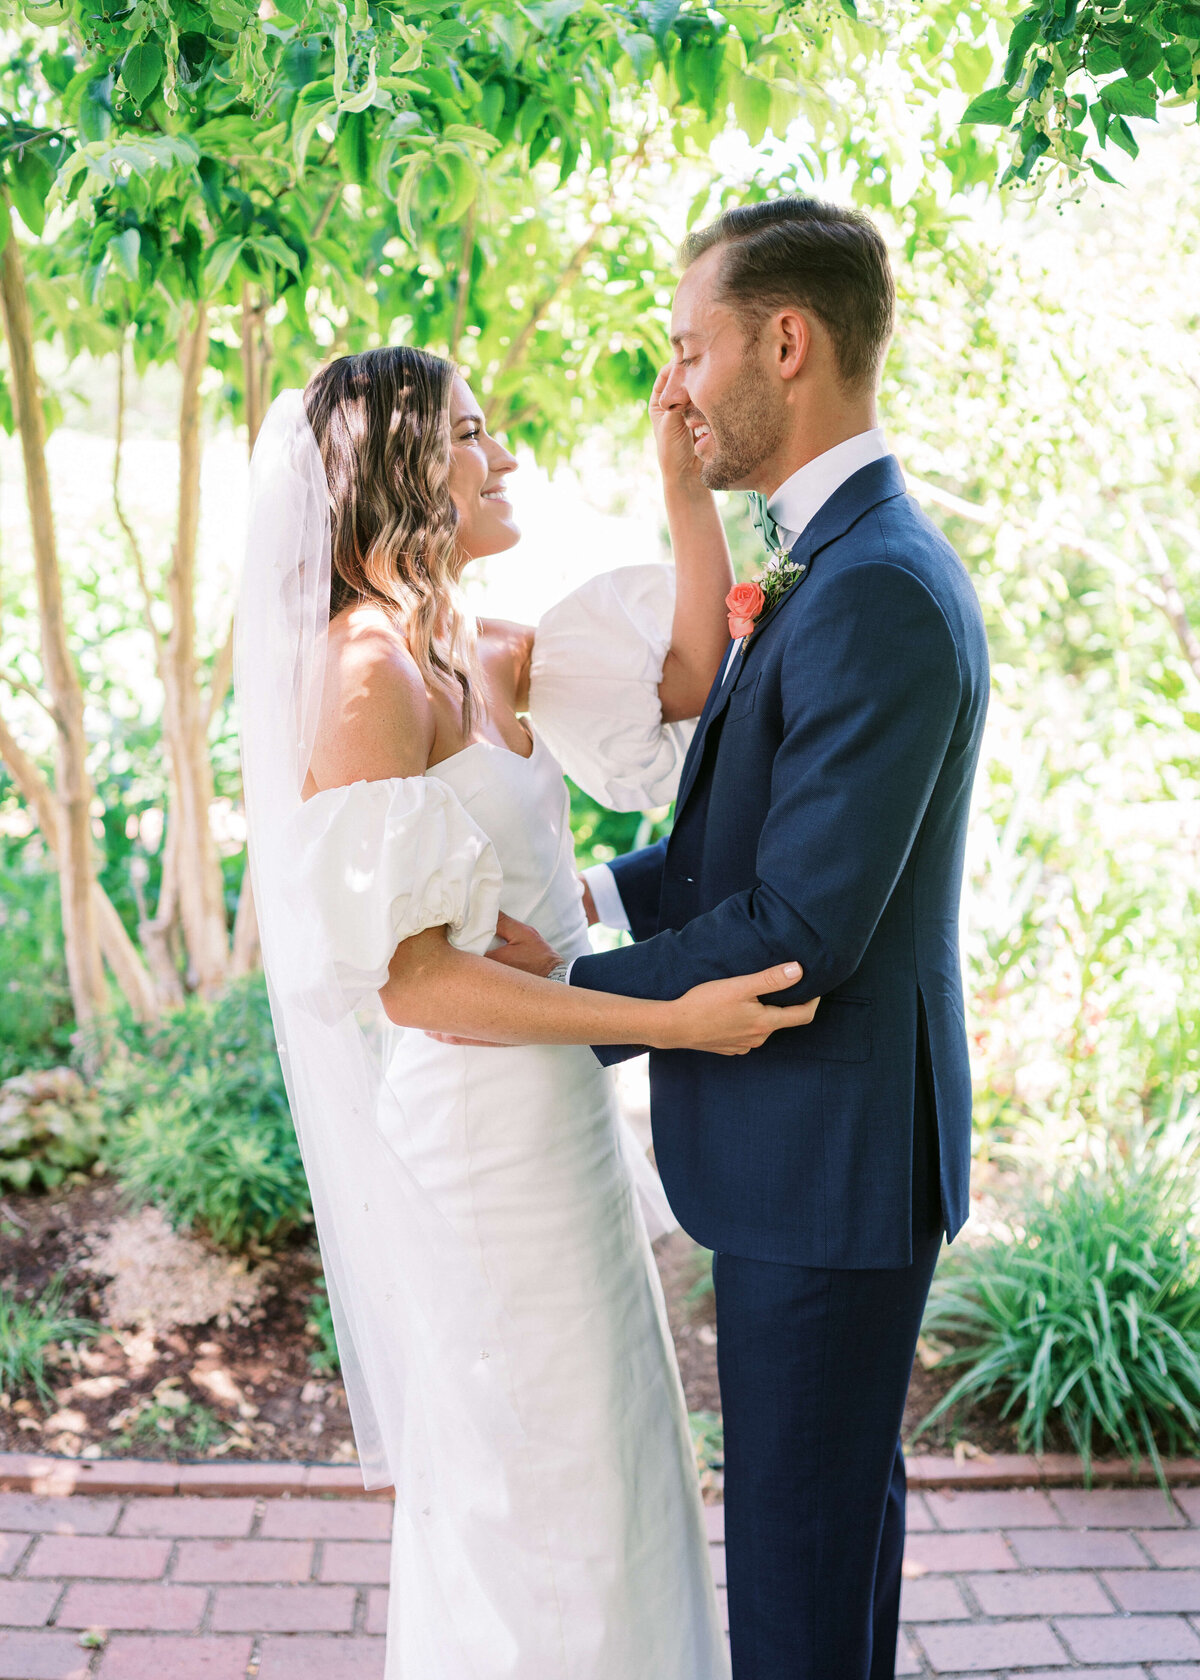 Bride and Groom wipe away tears during their first look in an image taken by Virginia Wedding Photographer